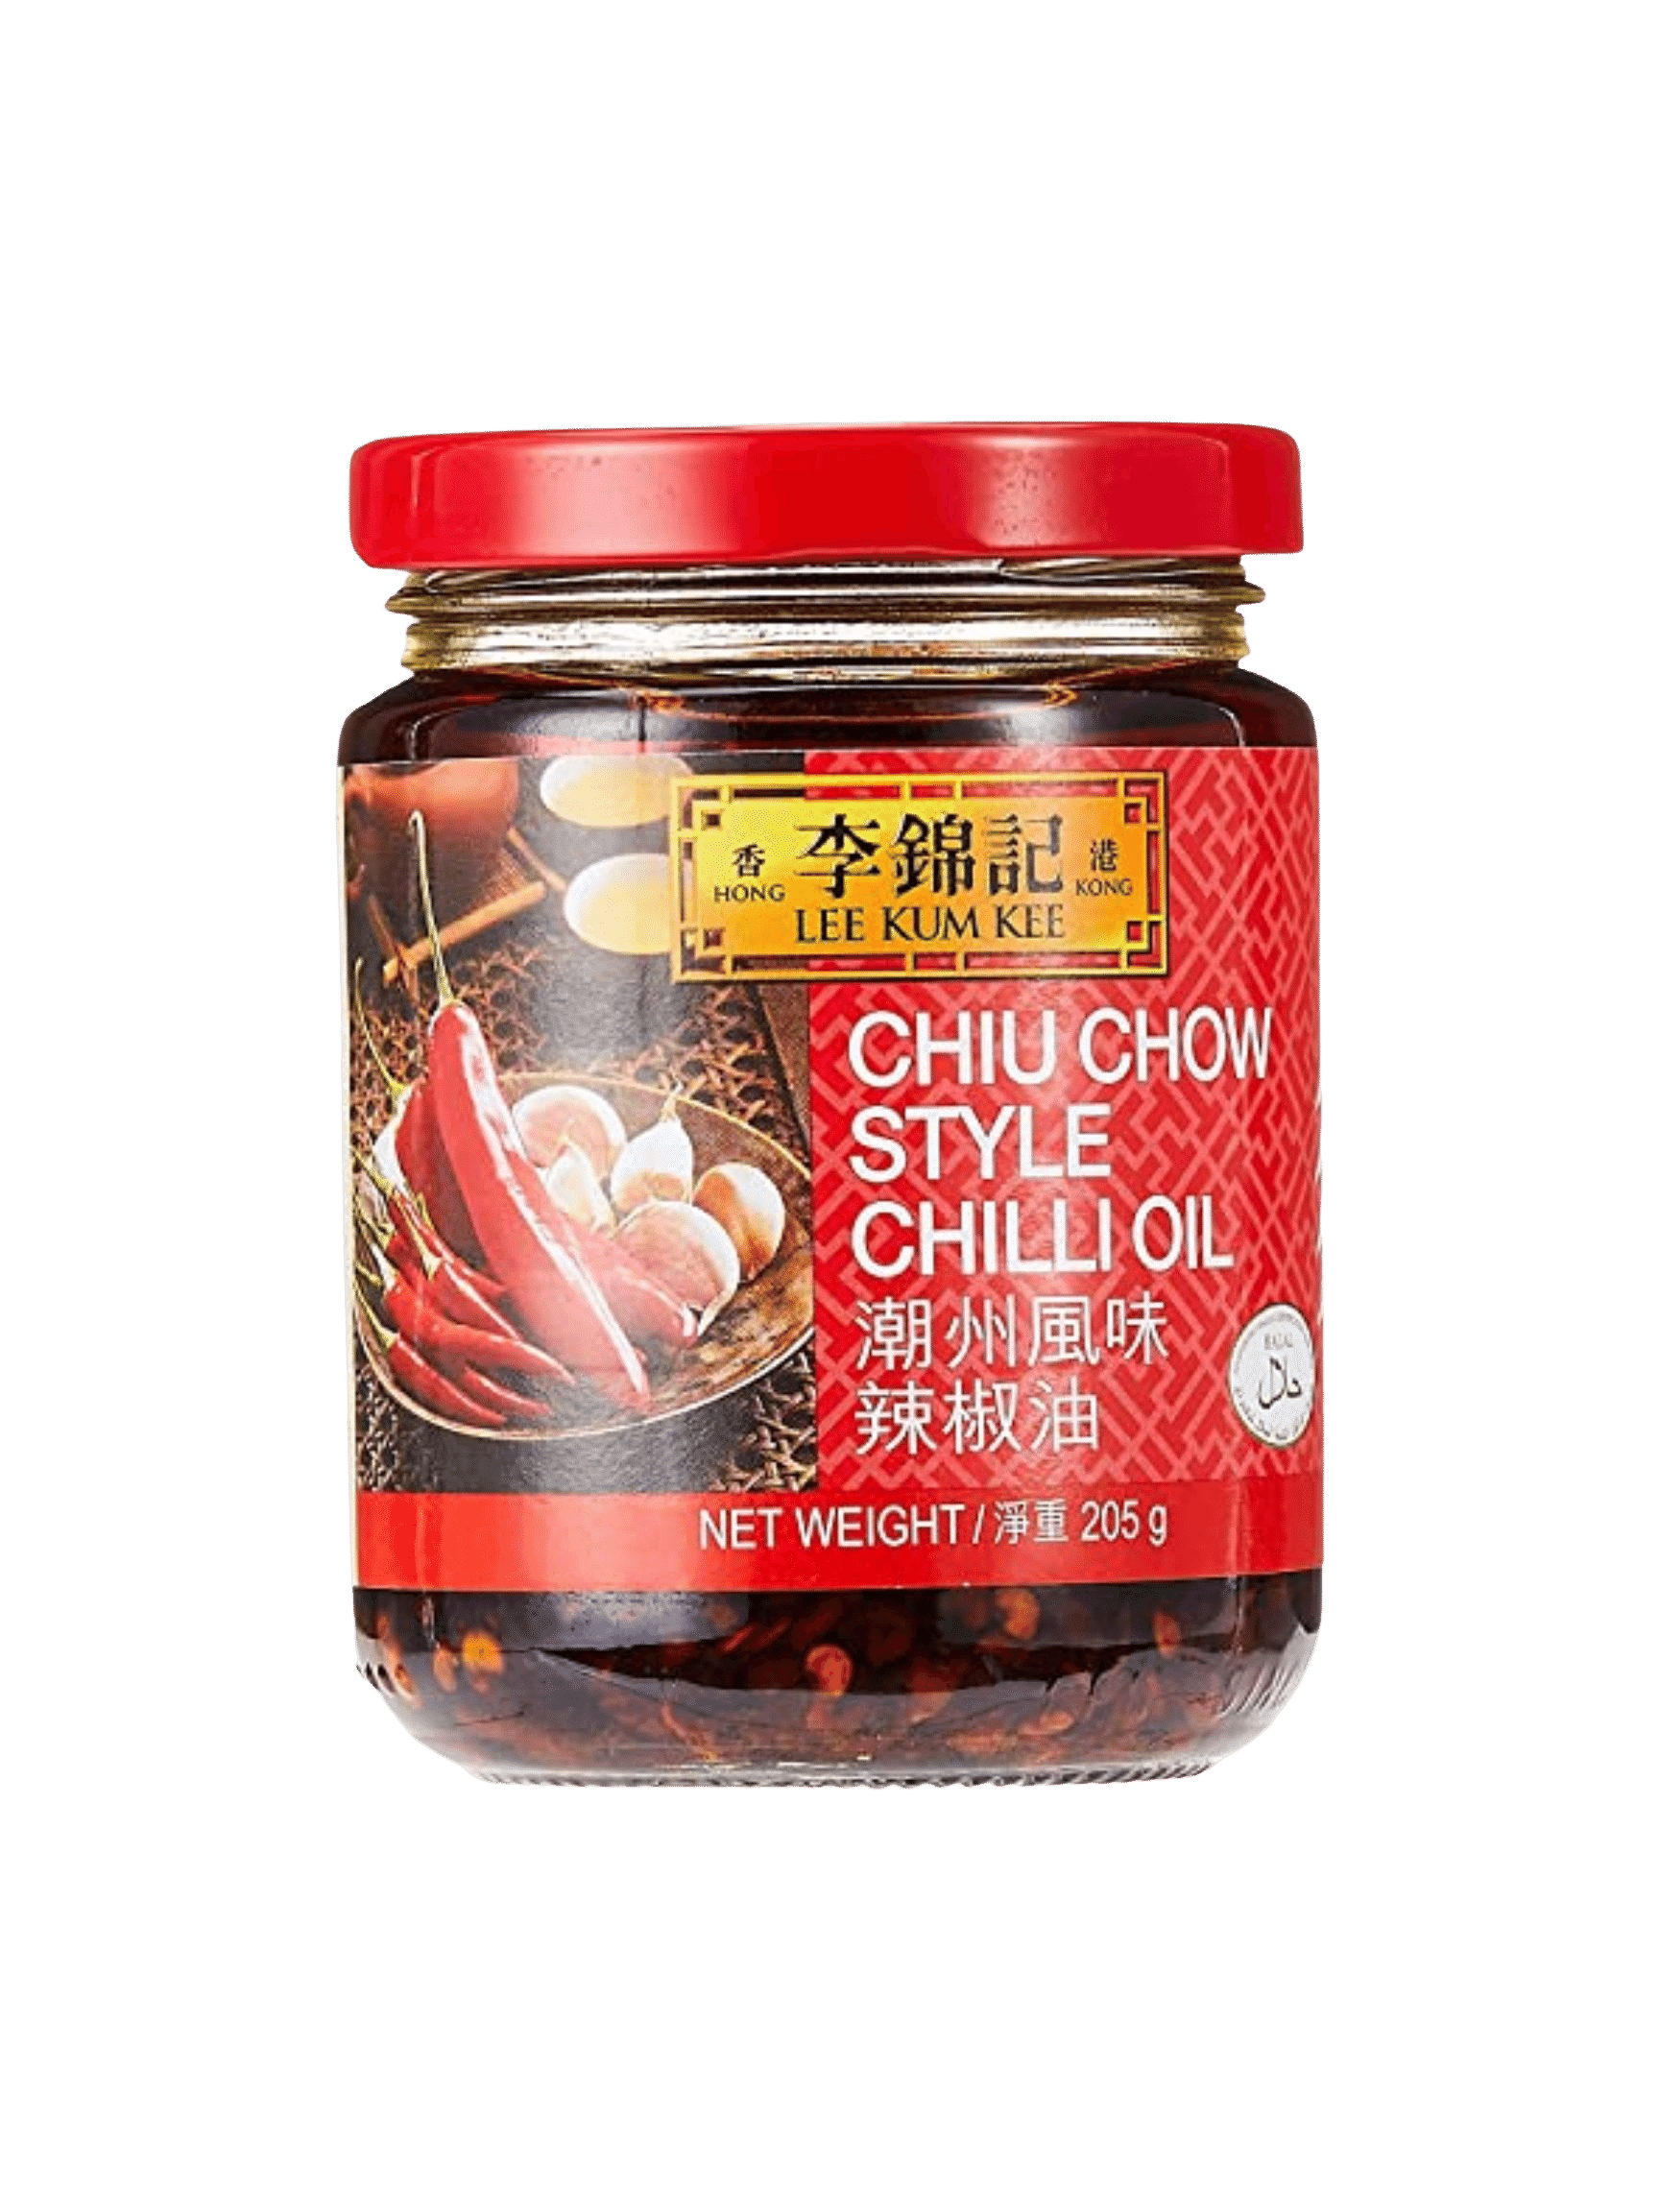 Lee Kum Kee Chiu Chow Chili Oil.png